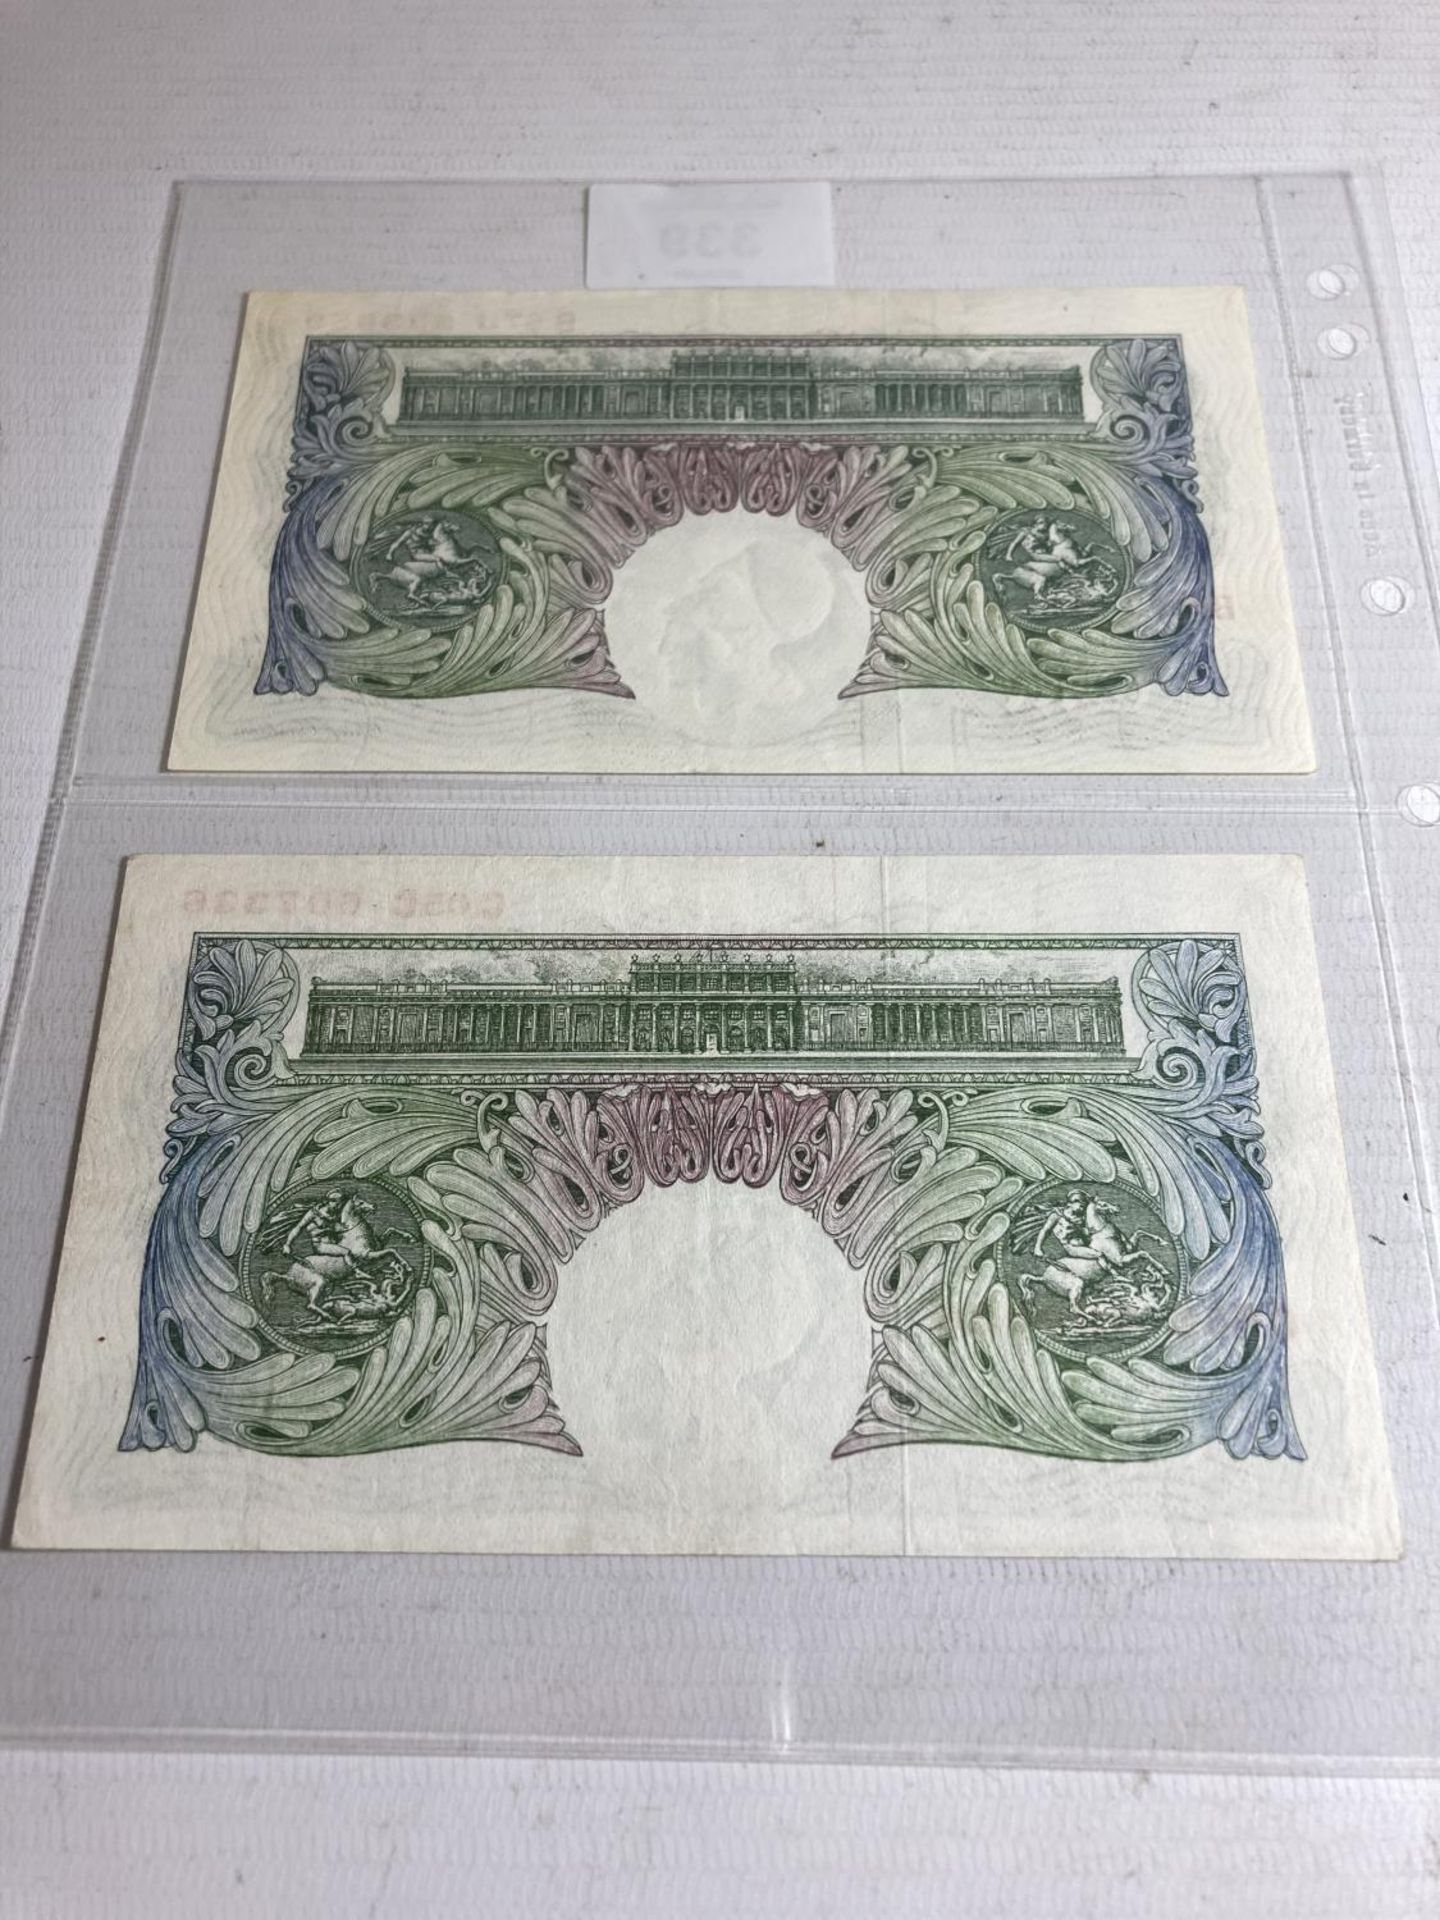 TWO BANK OF ENGLAND ONE POUND NOTES SIGNED BEALE (1949-1955) - Image 6 of 6